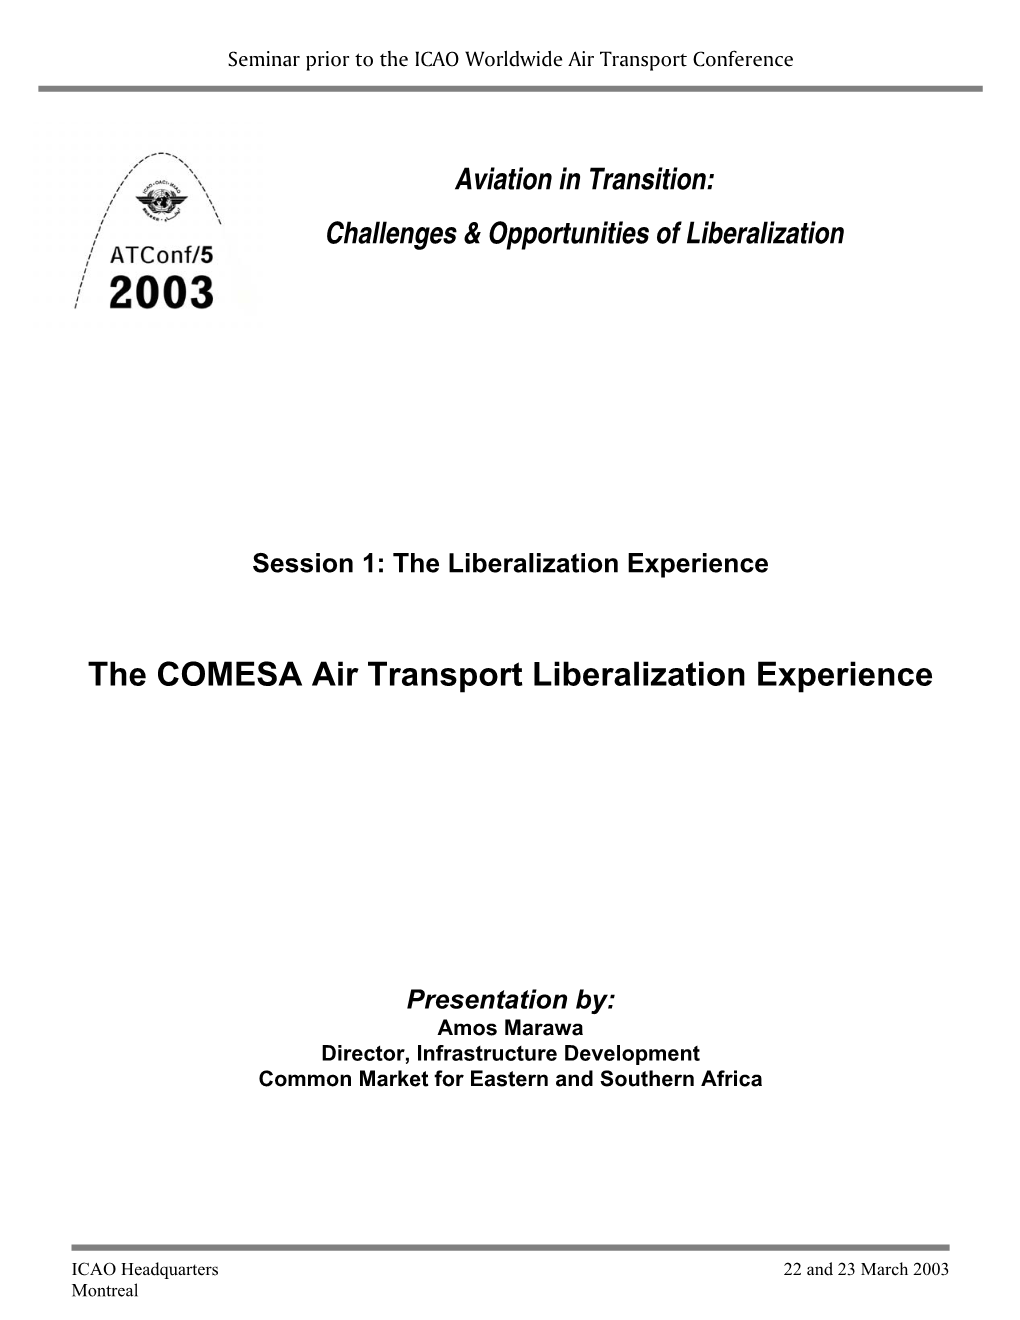 The COMESA Air Transport Liberalization Experience